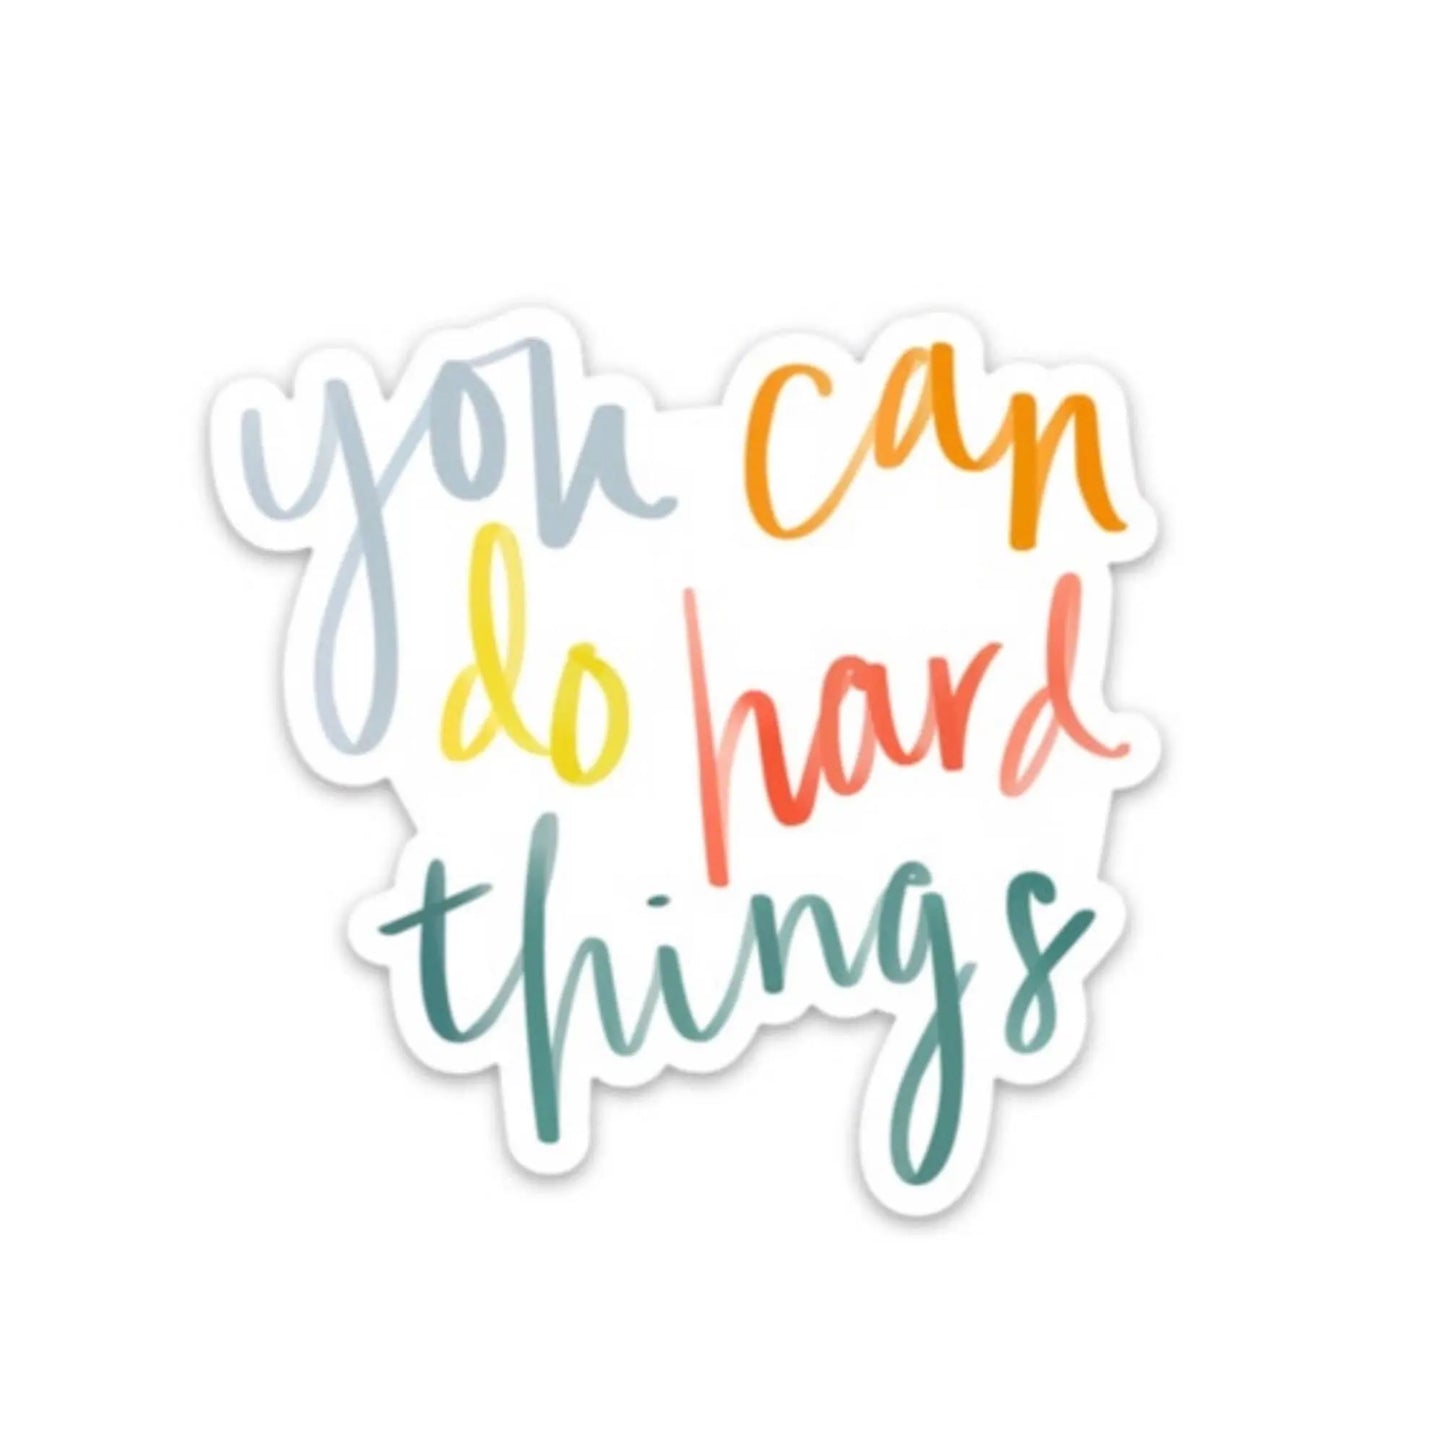 Magnet | You can do hard things | Refrigerator magnet swaygirls